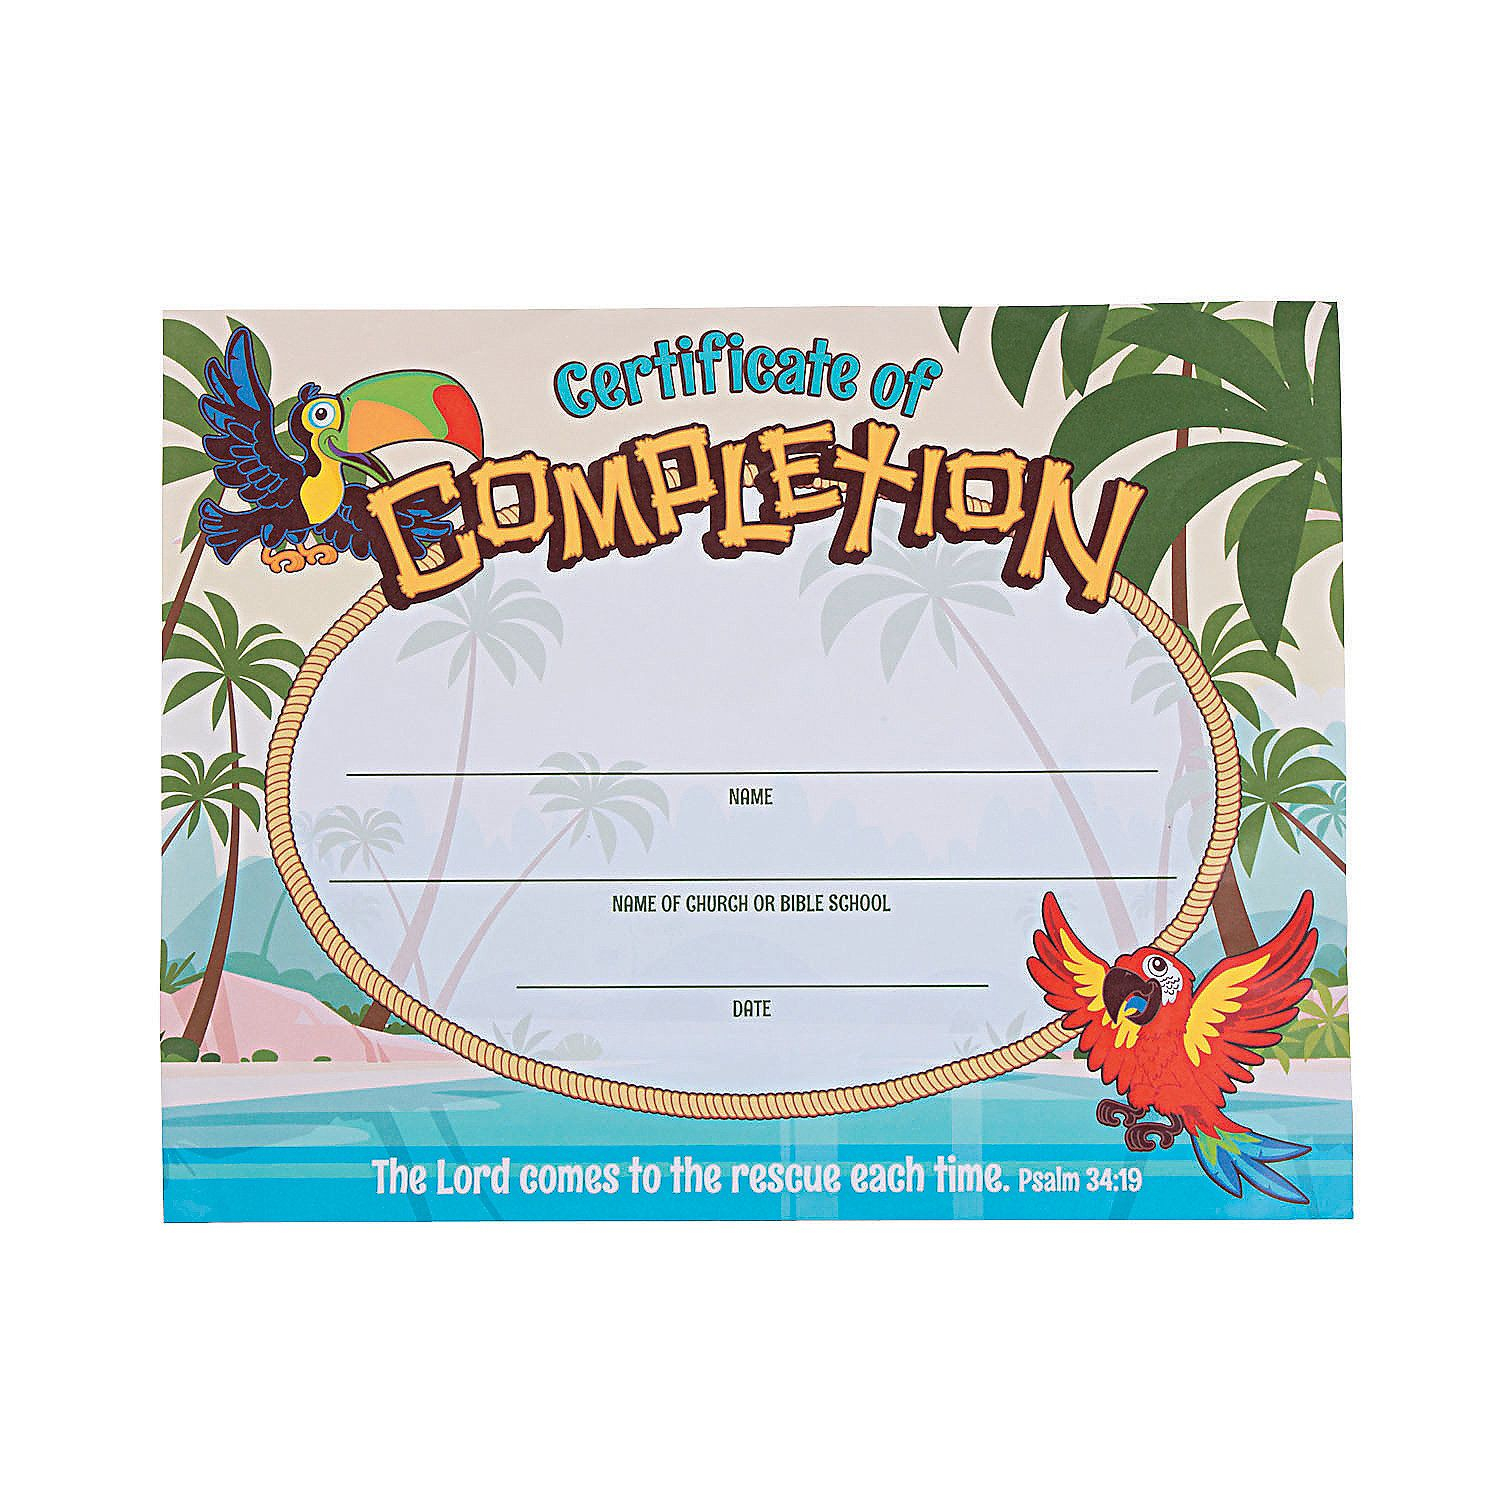 Island Vbs Certificates Of Completion | Stuff I Designed For Within Vbs Certificate Template